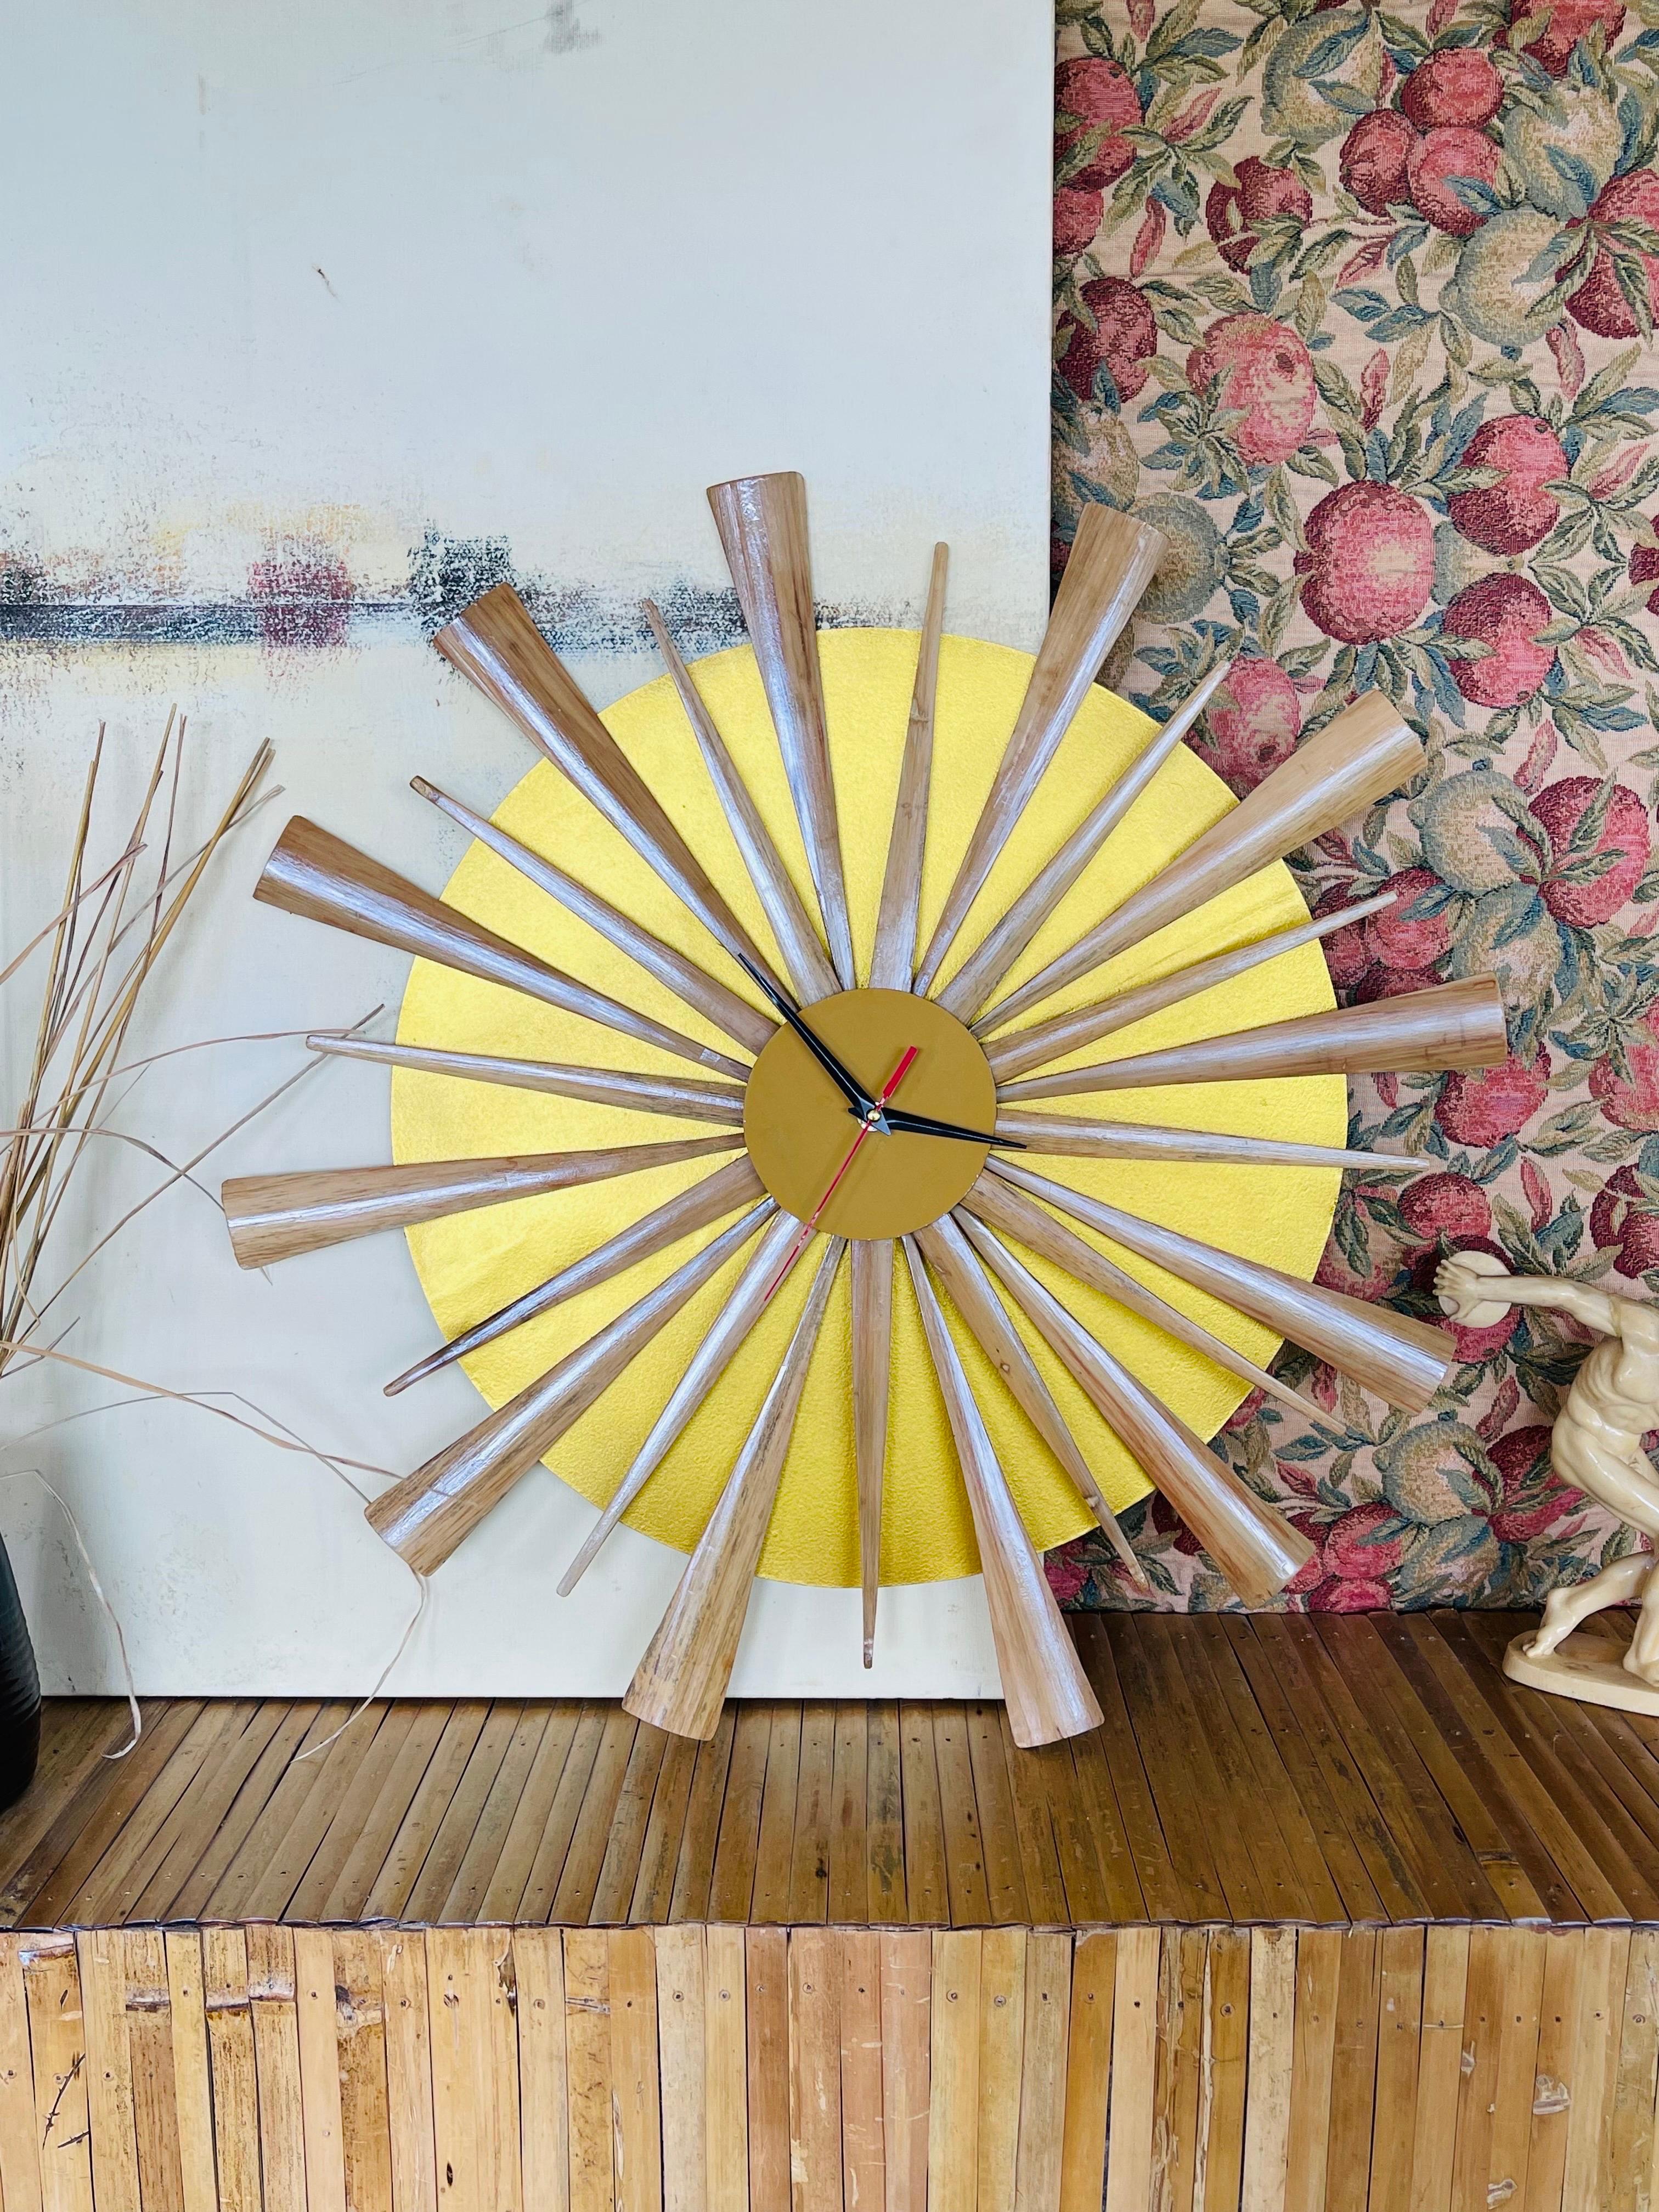 This is a High-quality Natural Rattan and Bamboo Mid Century style Starburst Clock Hand crafted by the local artisans in the Philippines

The clock measures 40cm in diameter

Organic Bamboo pieces with clear lacquer (All bamboo pieces were treated